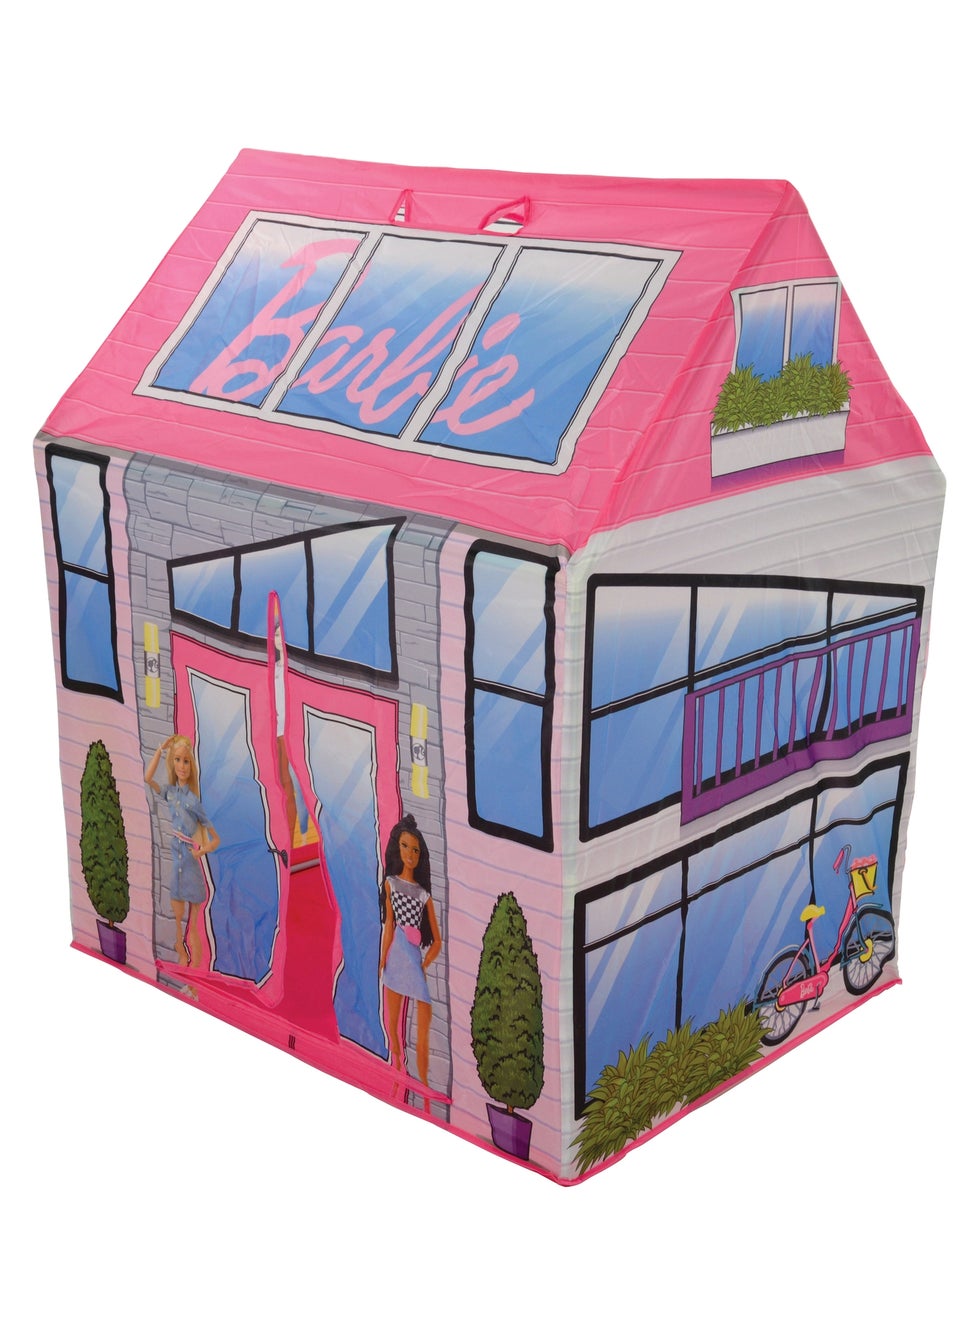 Barbie Play House Tent